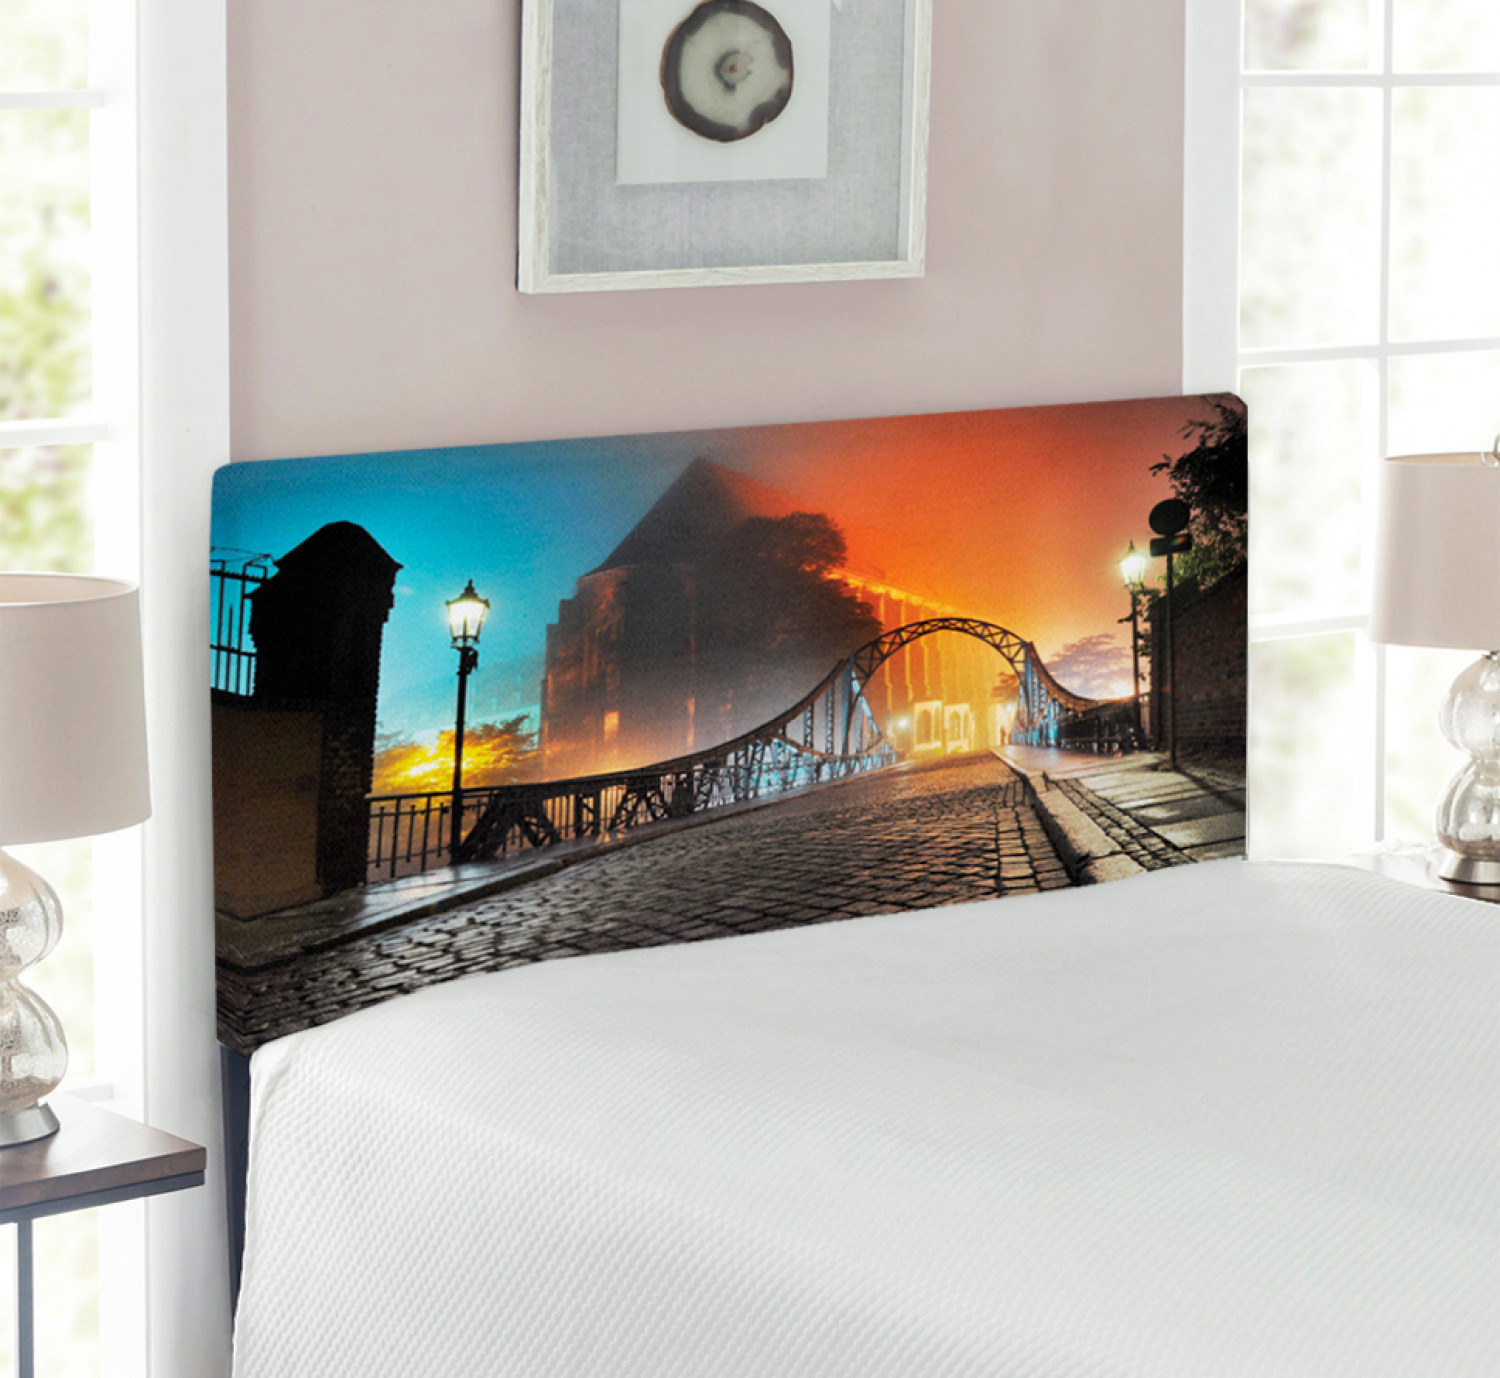 Landscape Headboard, Modern City Bridge at Night with Sightseeing Urban Theme Landscape, Upholstered Decorative Metal Bed Headboard with Memory Foam, Twin Size, Grey Orange, by Ambesonne - image 2 of 4